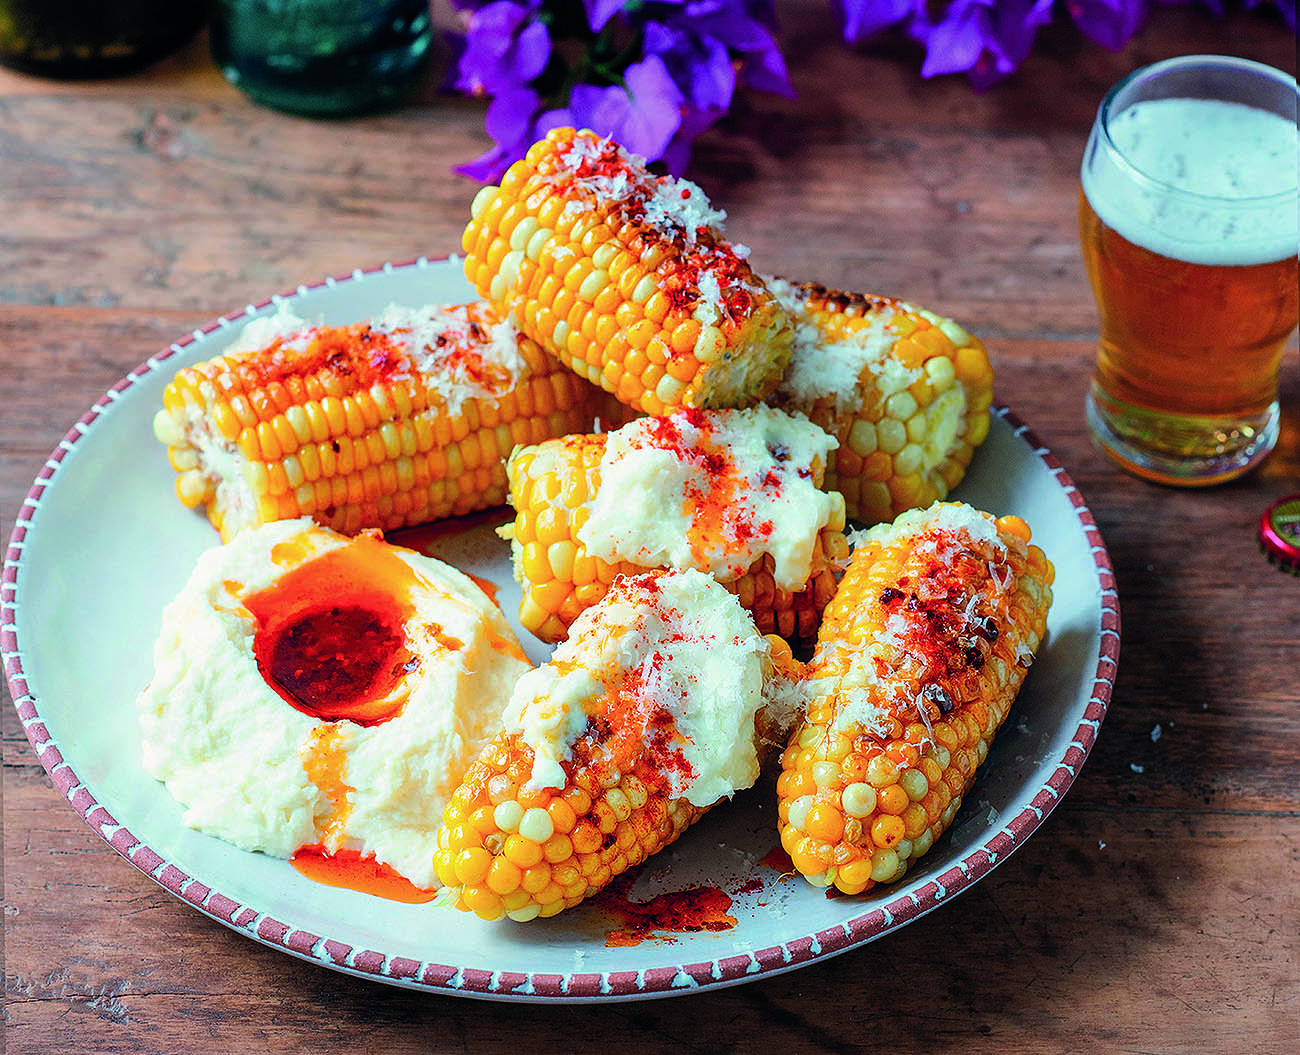 p36 Good living - Mexican Delights - Grilled Corn